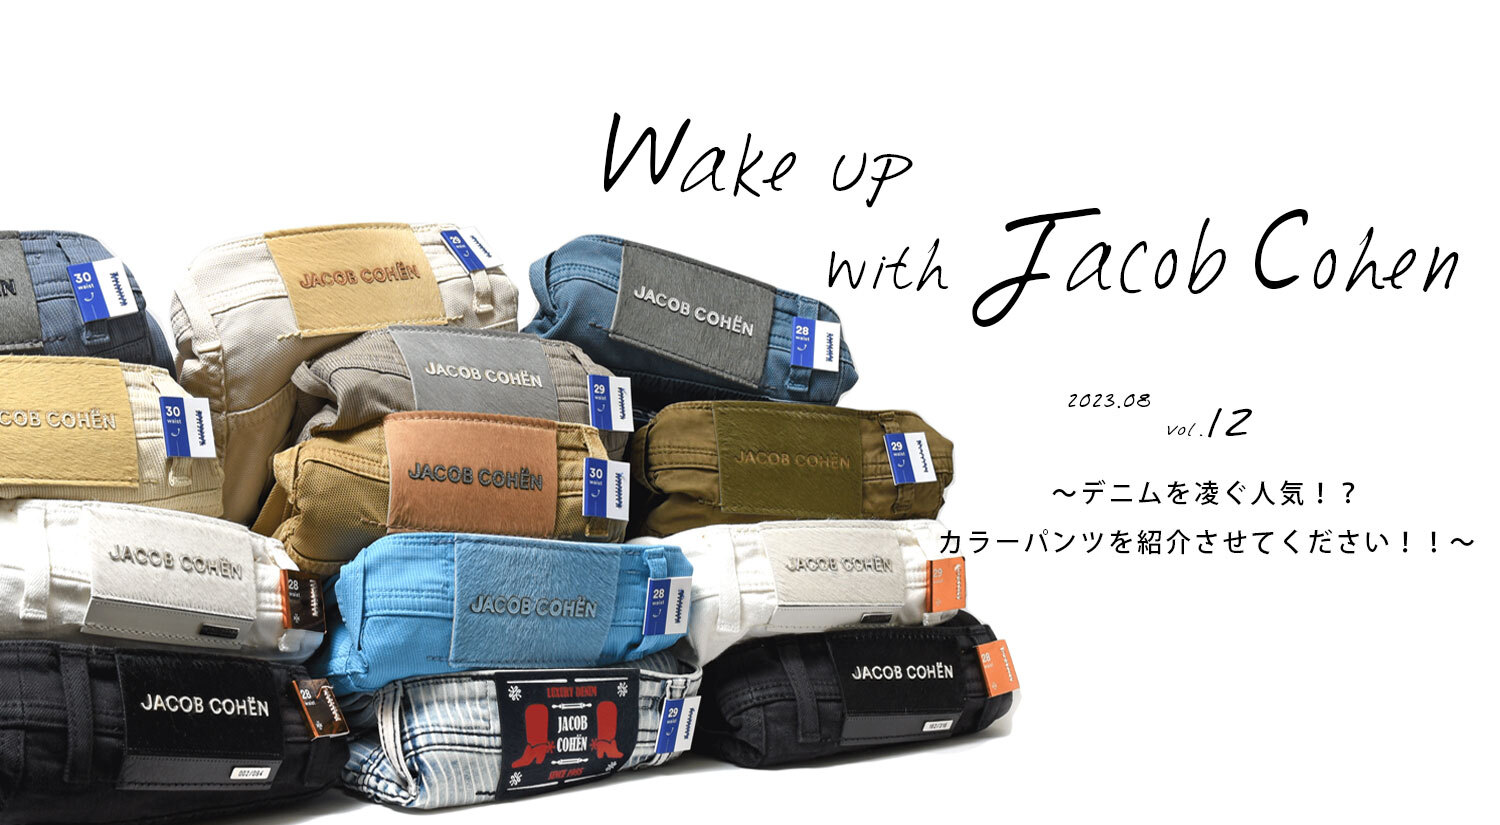 Wake up with Jacob cohen Vol.12